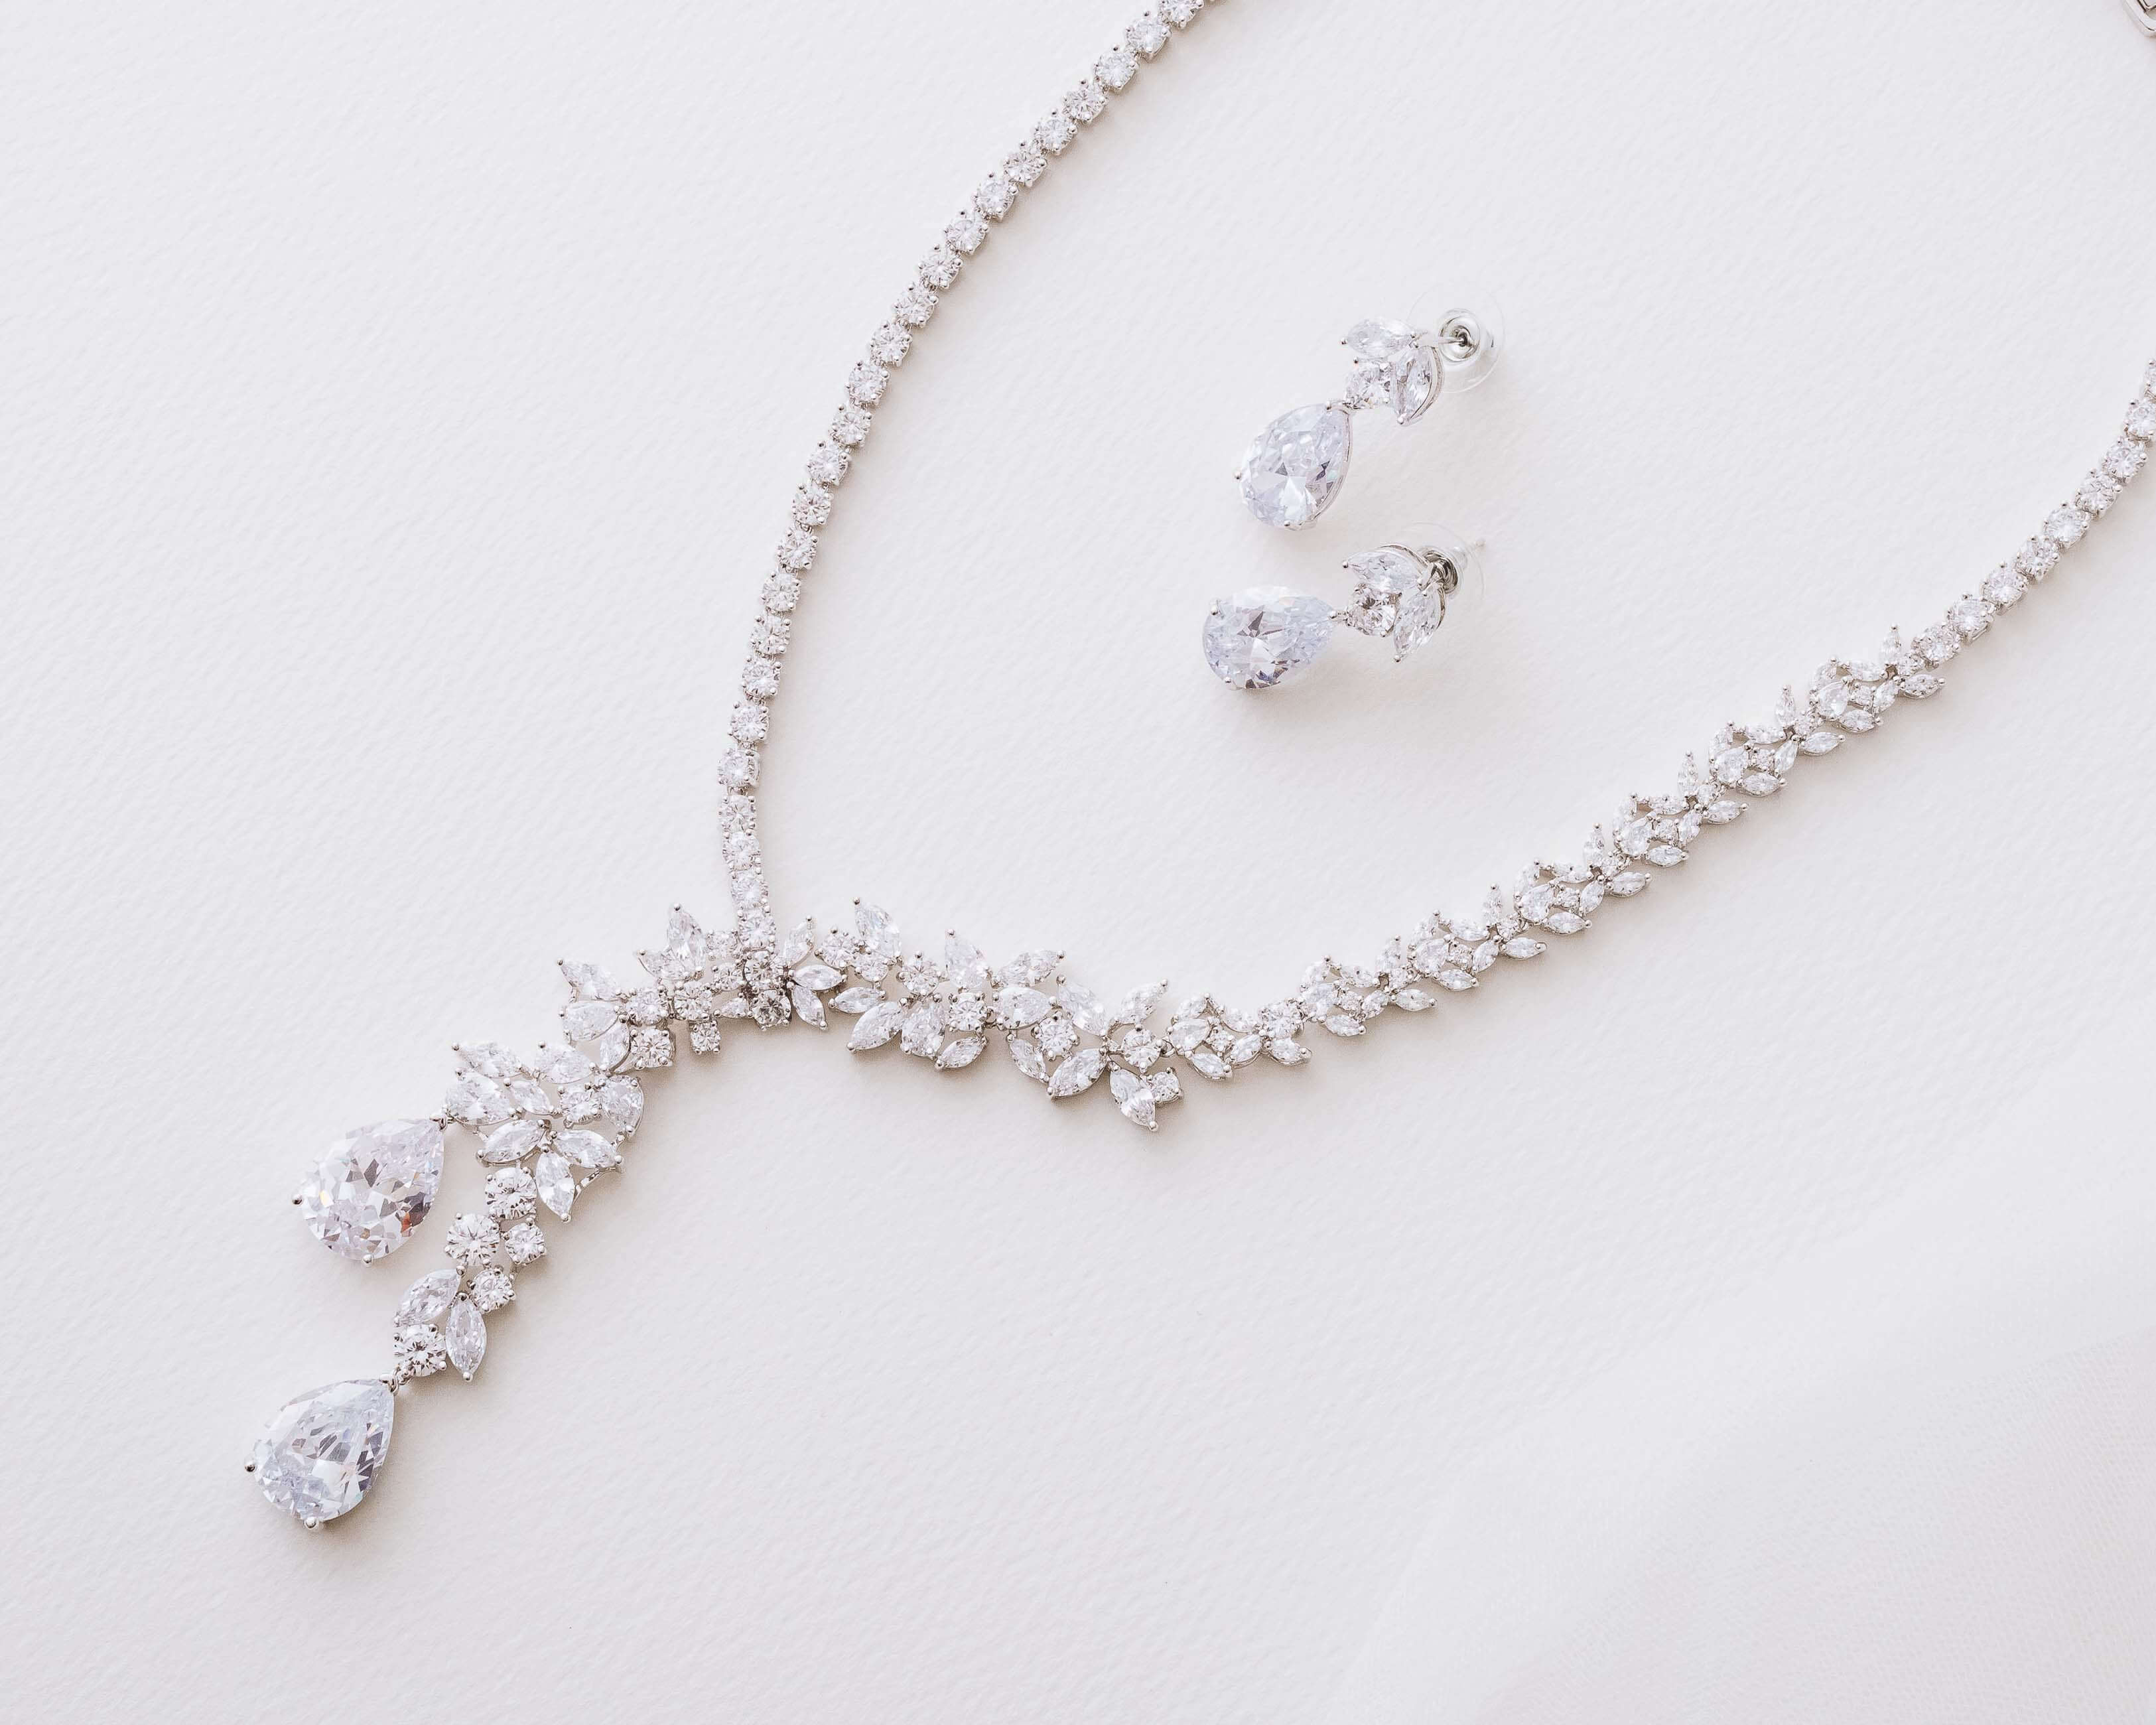 Silver Bridal Necklace and Earrings Set - The perfect wedding jewelry.